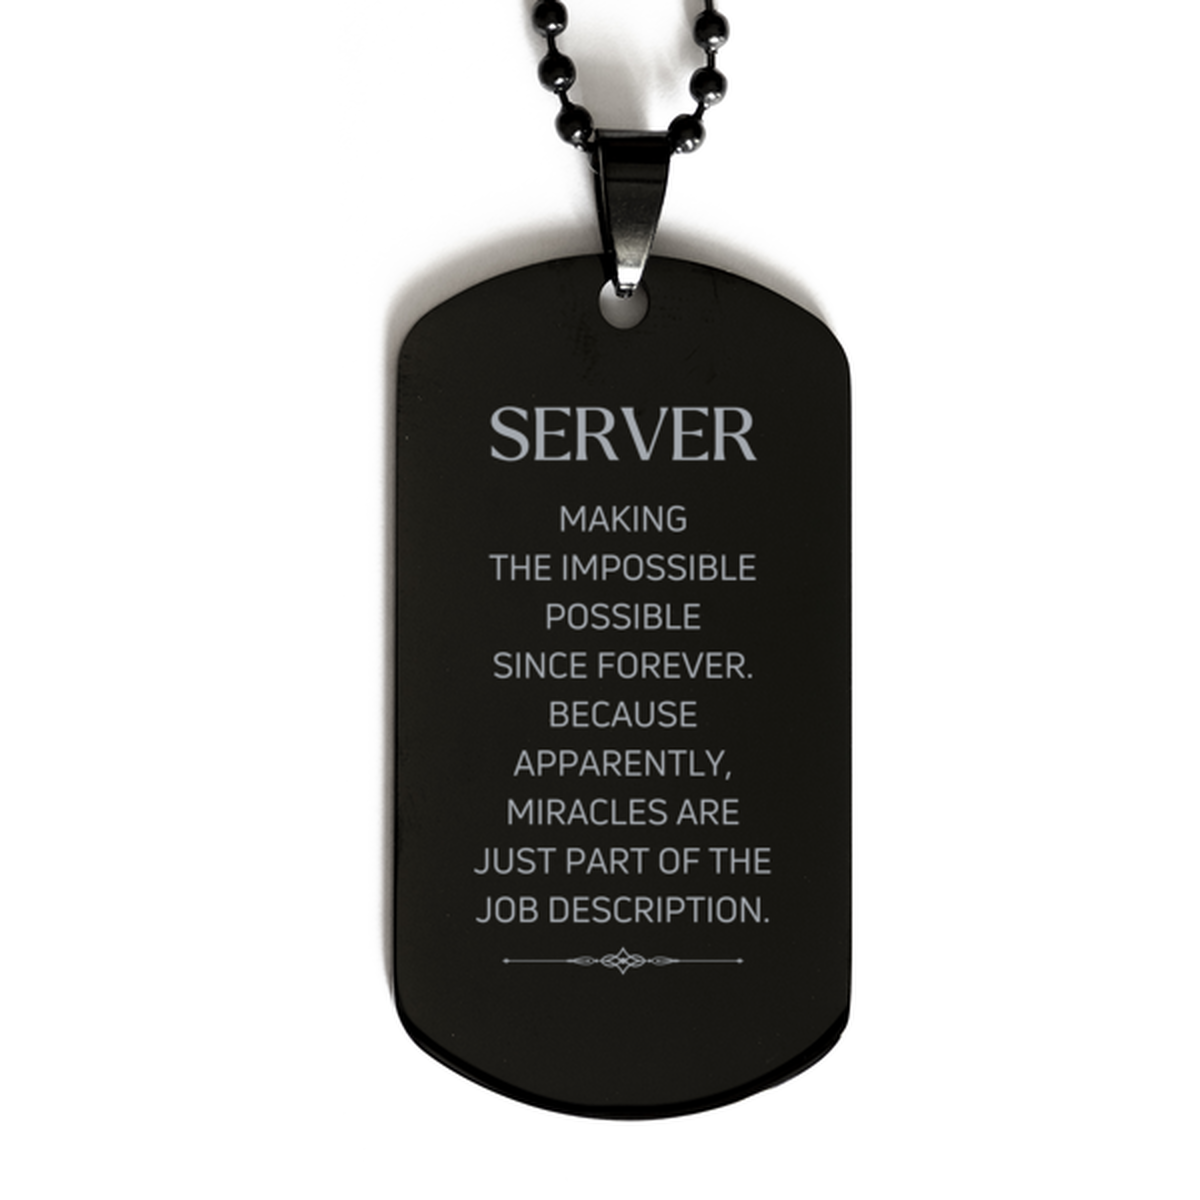 Funny Server Gifts, Miracles are just part of the job description, Inspirational Birthday Black Dog Tag For Server, Men, Women, Coworkers, Friends, Boss